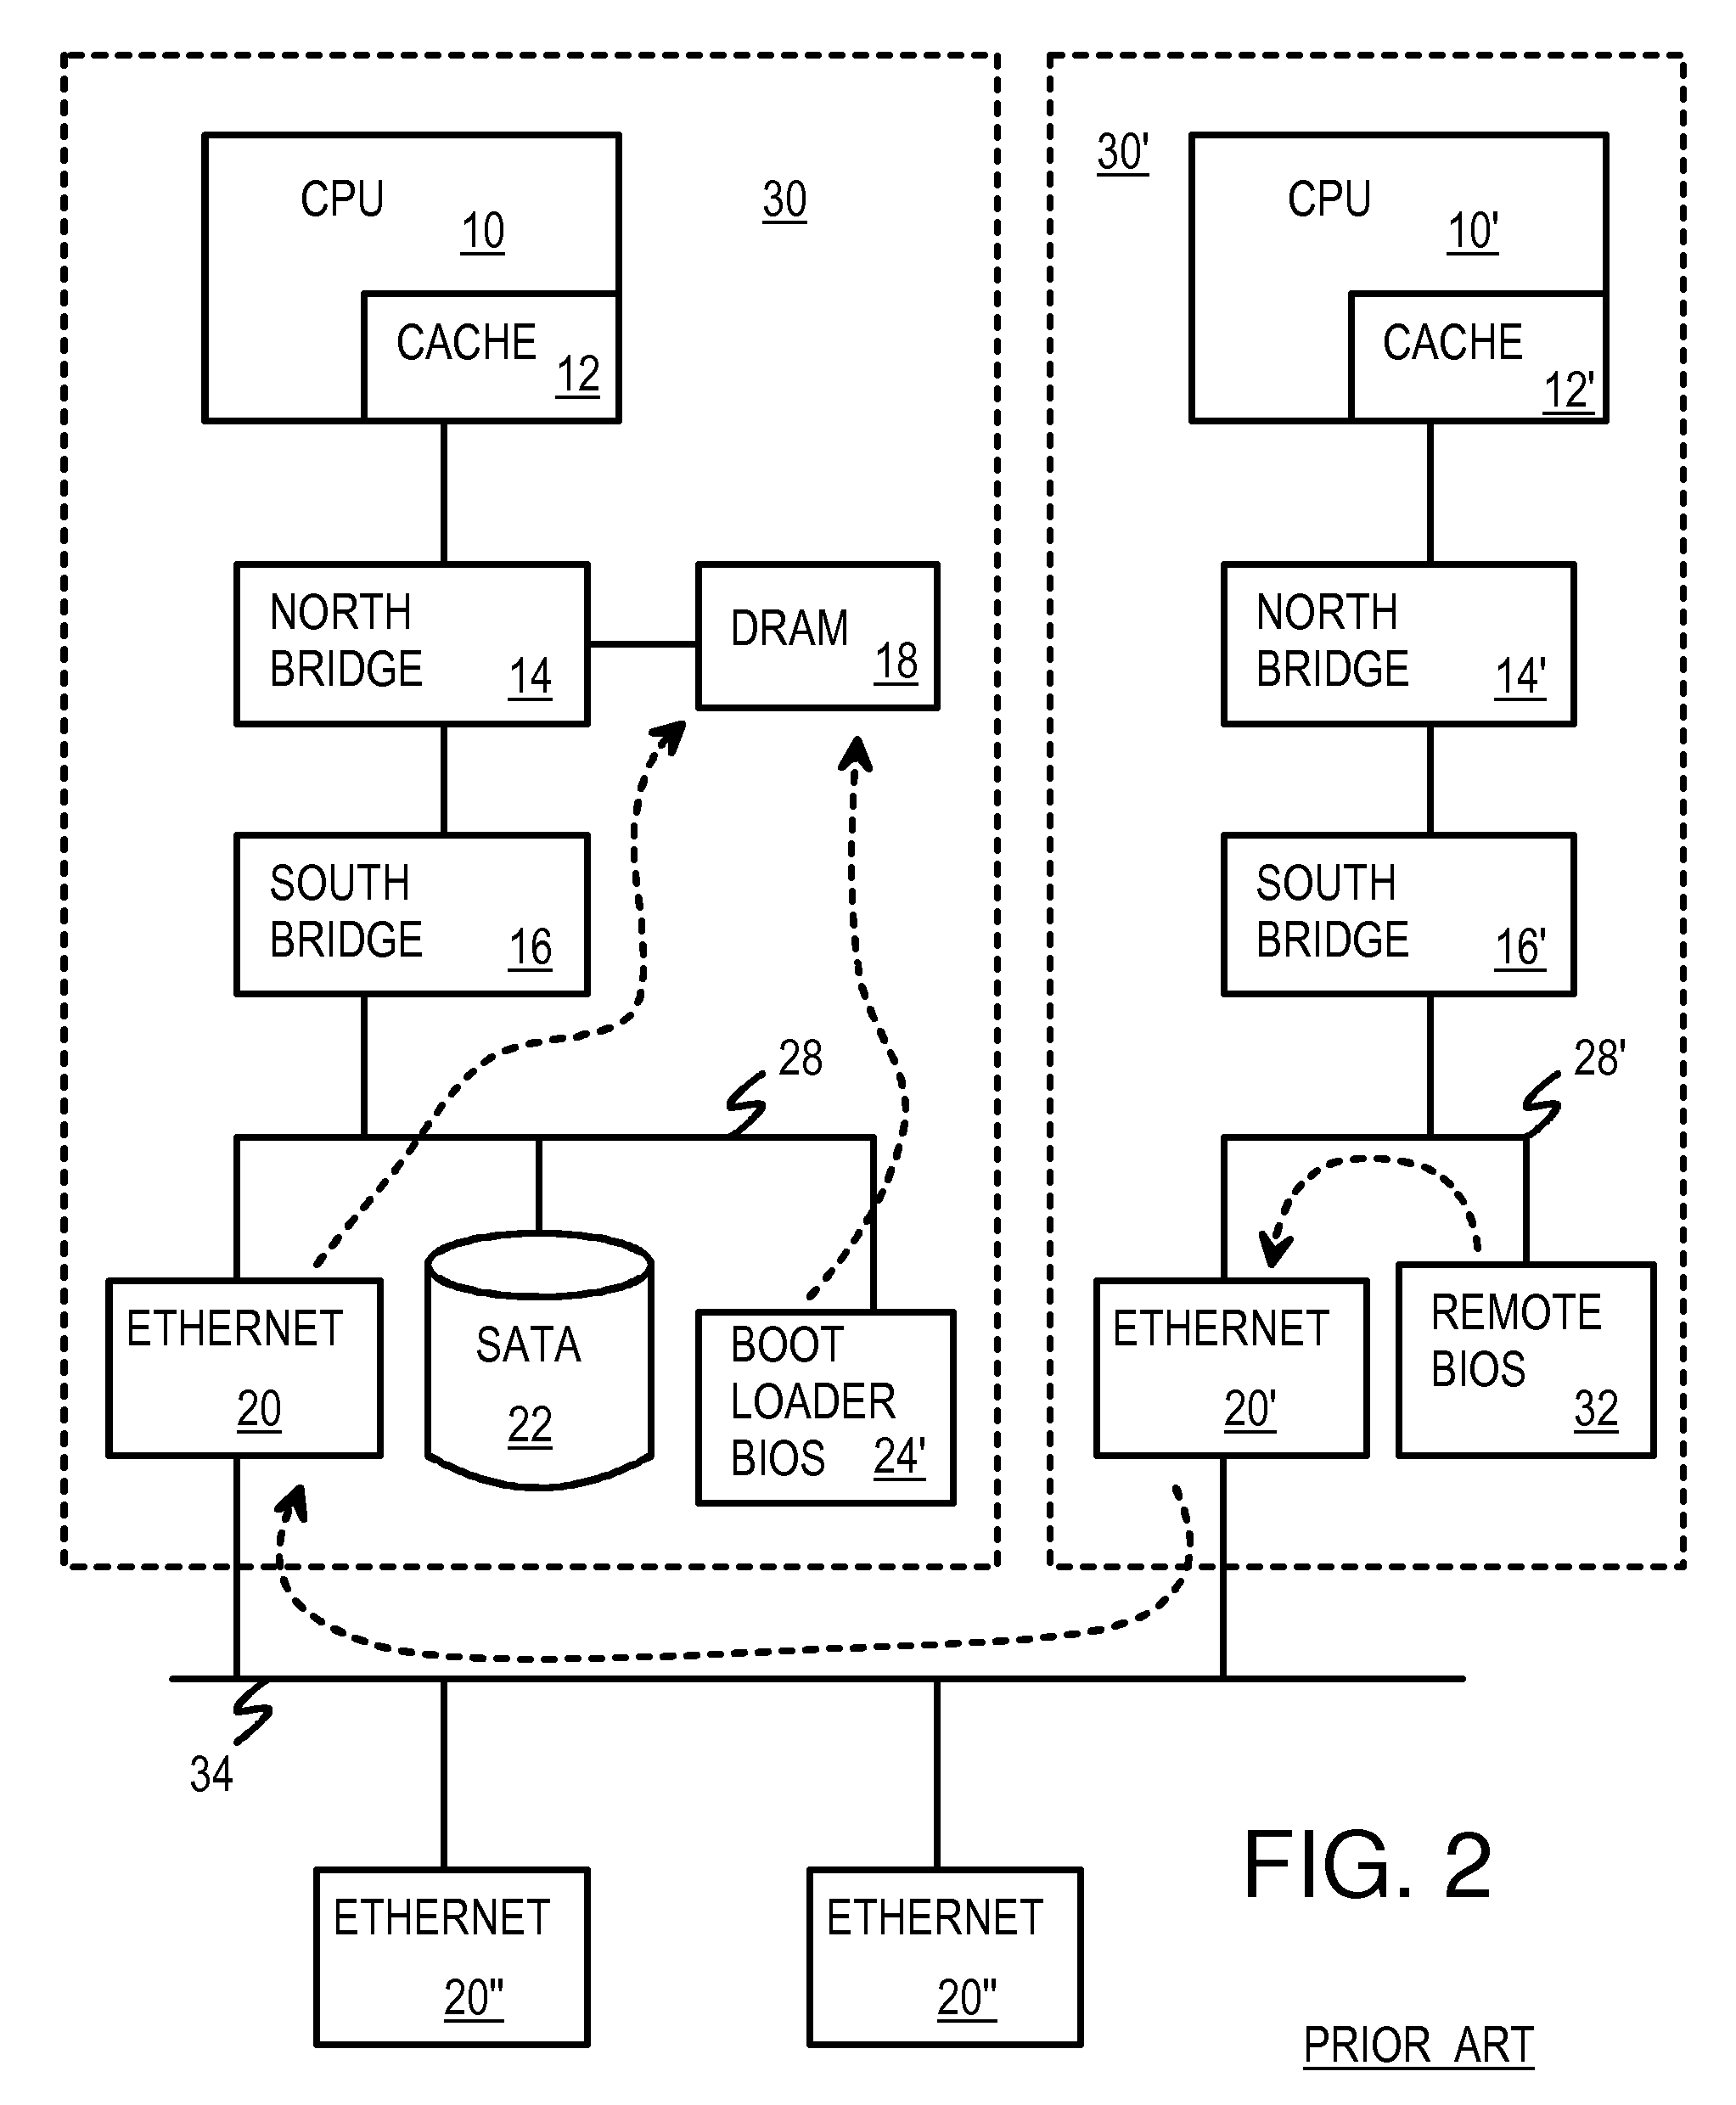 Hardware-based virtualization of BIOS, disks, network-interfaces, and consoles using a direct interconnect fabric